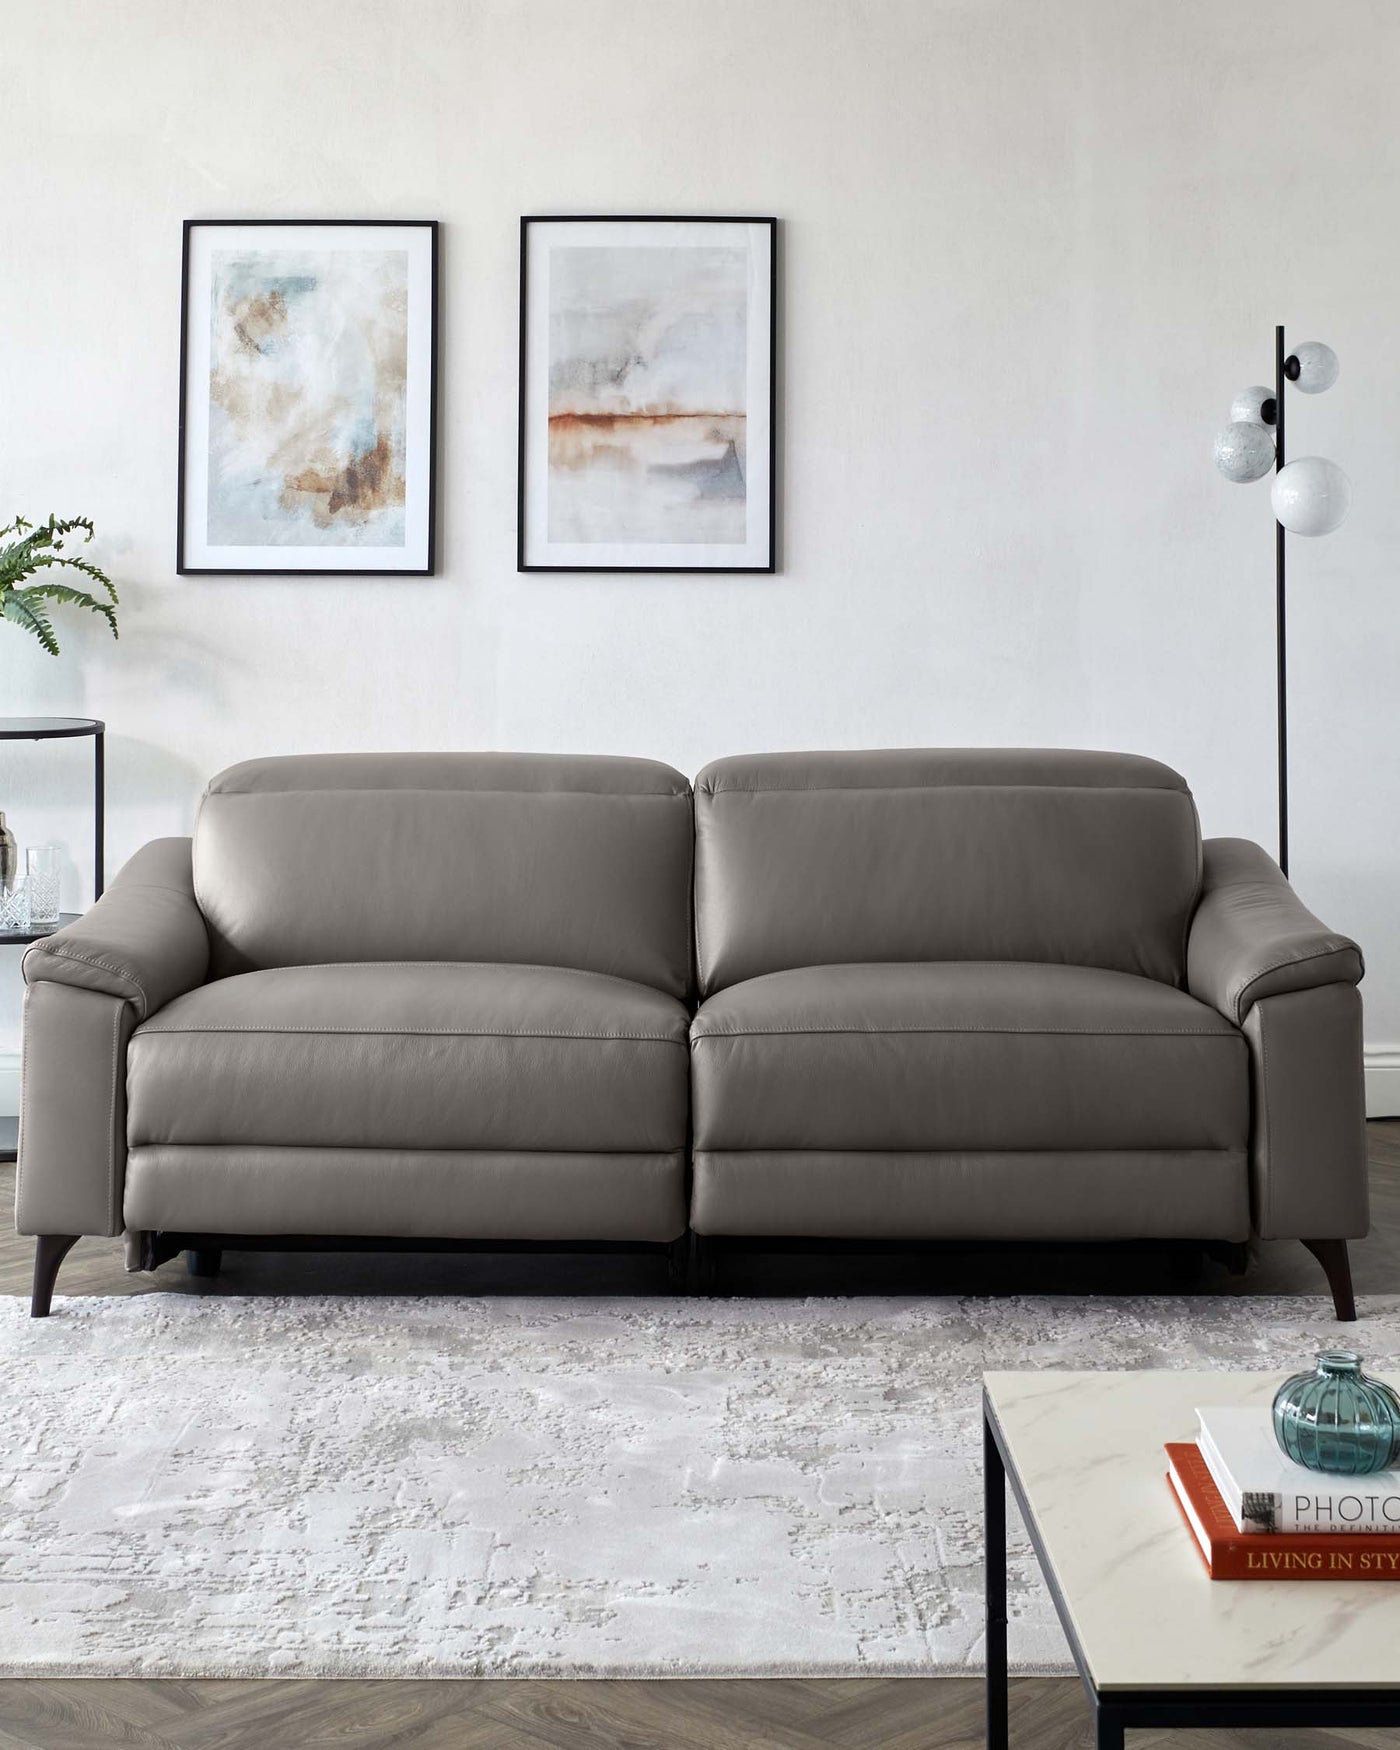 Modern grey leather sofa with clean lines and dark wooden legs, positioned on a textured off-white area rug, accompanied by a minimalist black metal floor lamp with glass globes, beside a sleek white marble-top coffee table with books and a decorative glass vase.